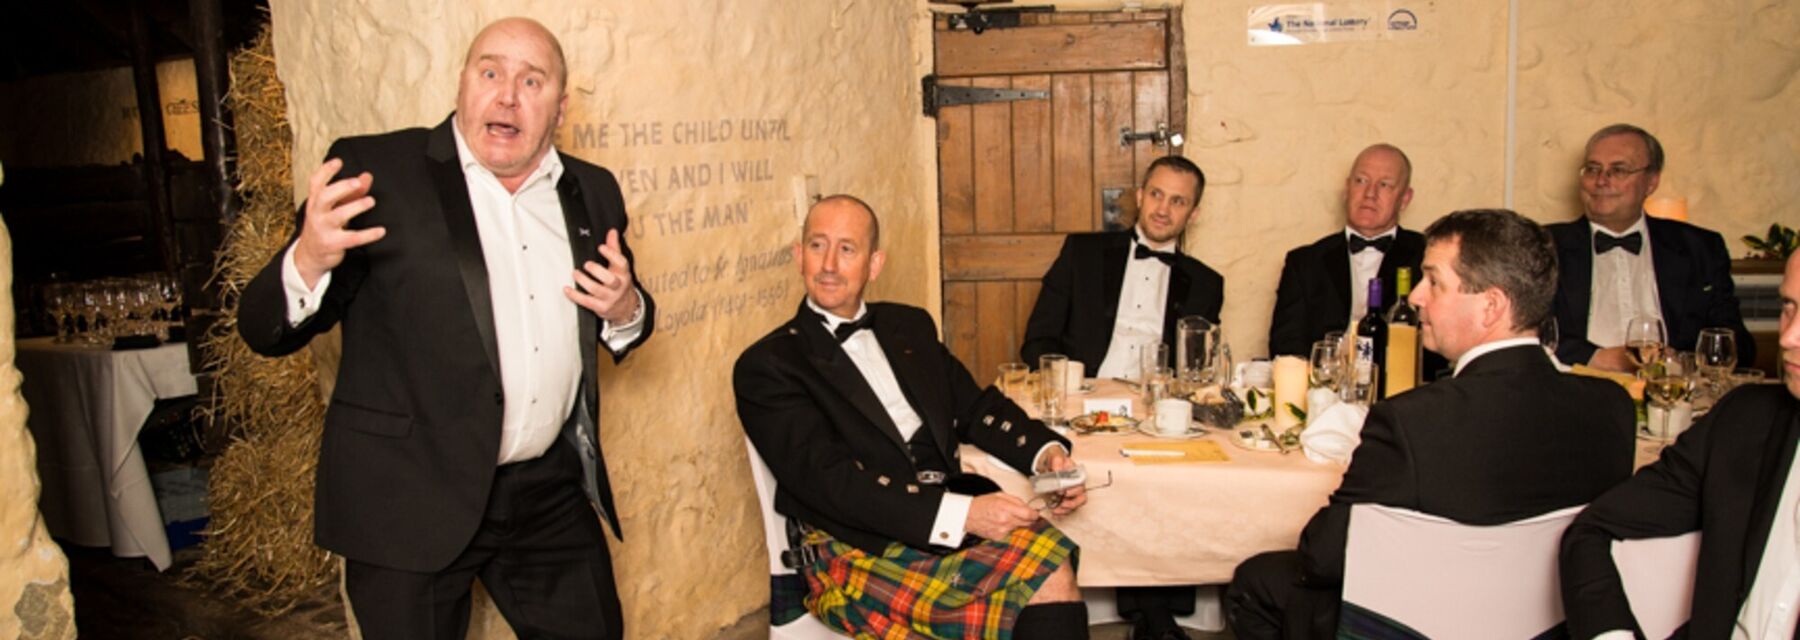 A group of people celebrating Burns Night